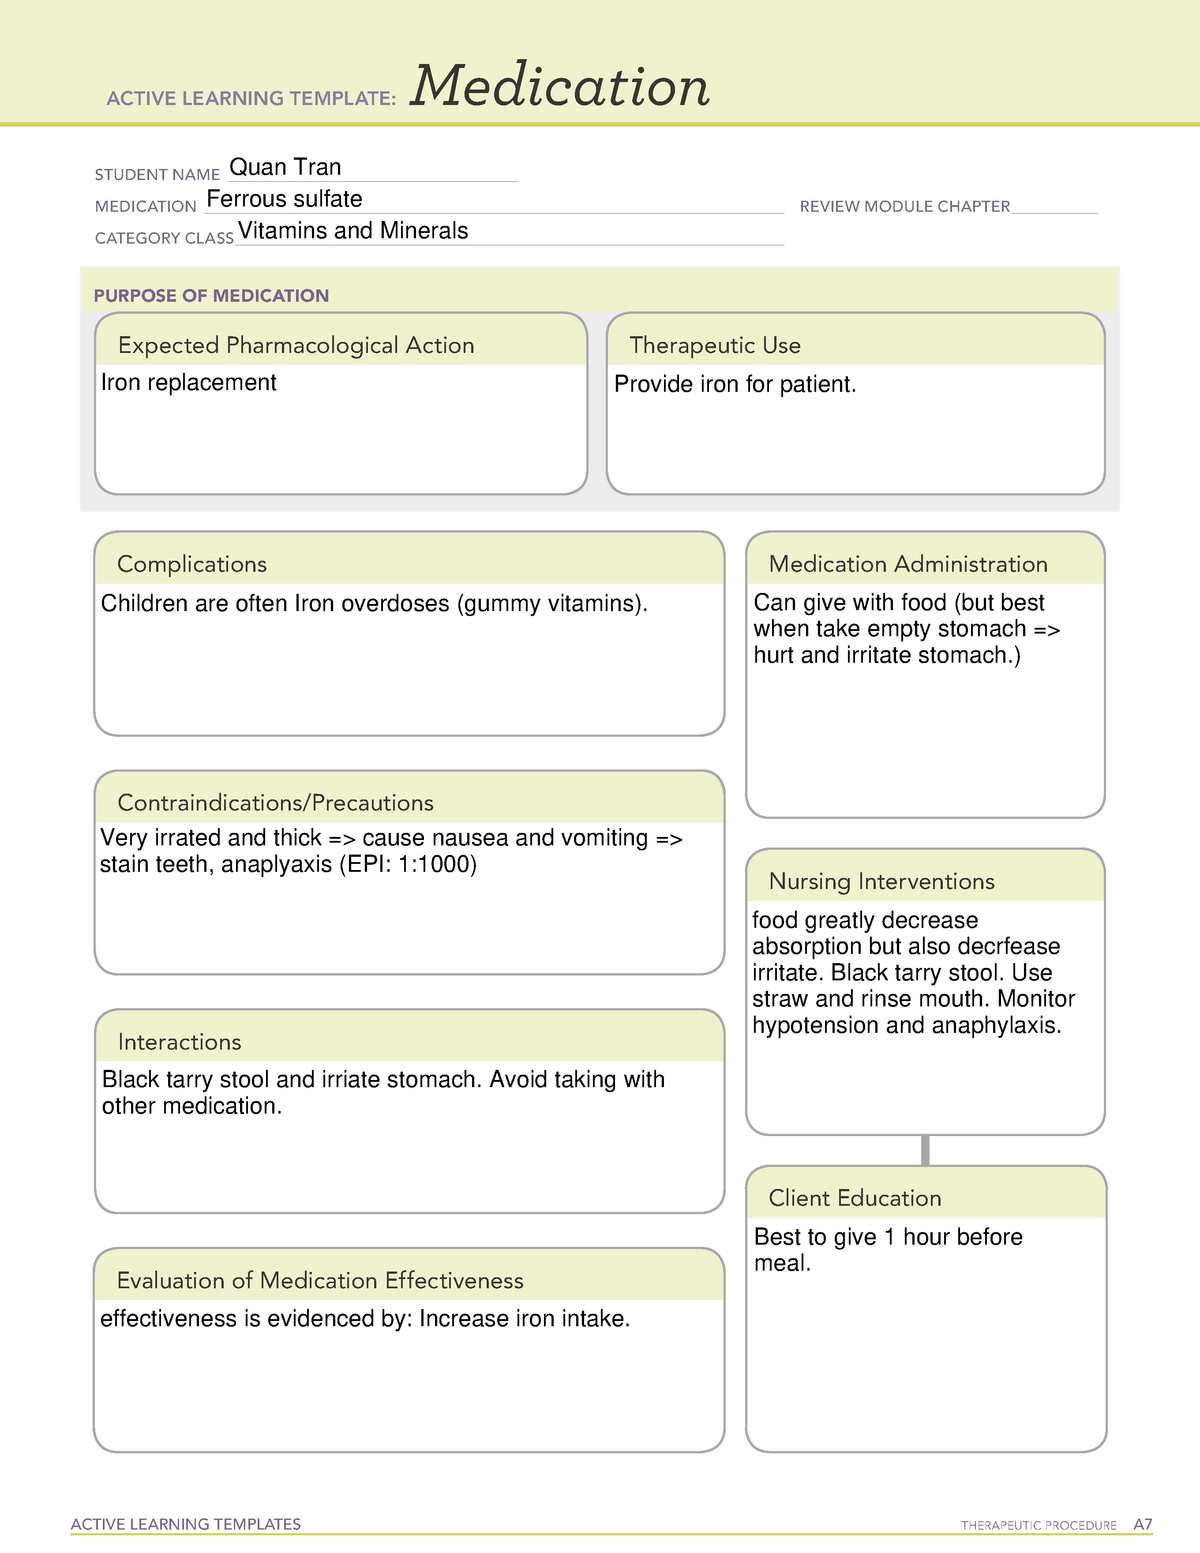 Ferrous Sulfate Medication Worksheet ACTIVE LEARNING TEMPLATES 